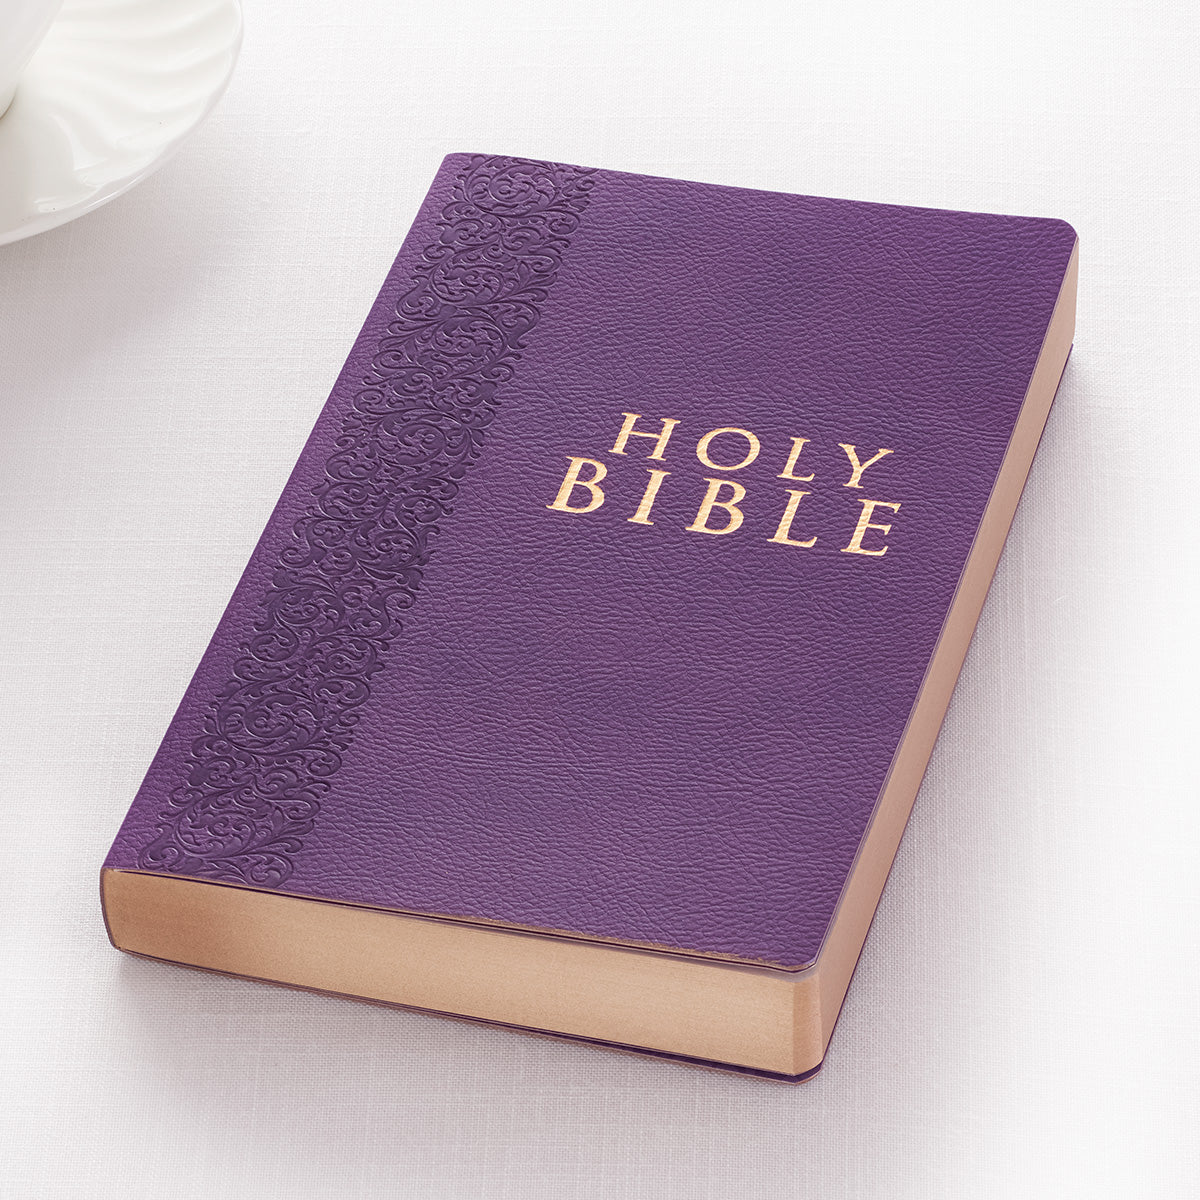 Purple Faux Leather King James Version Gift and Award Bible - The Christian Gift Company